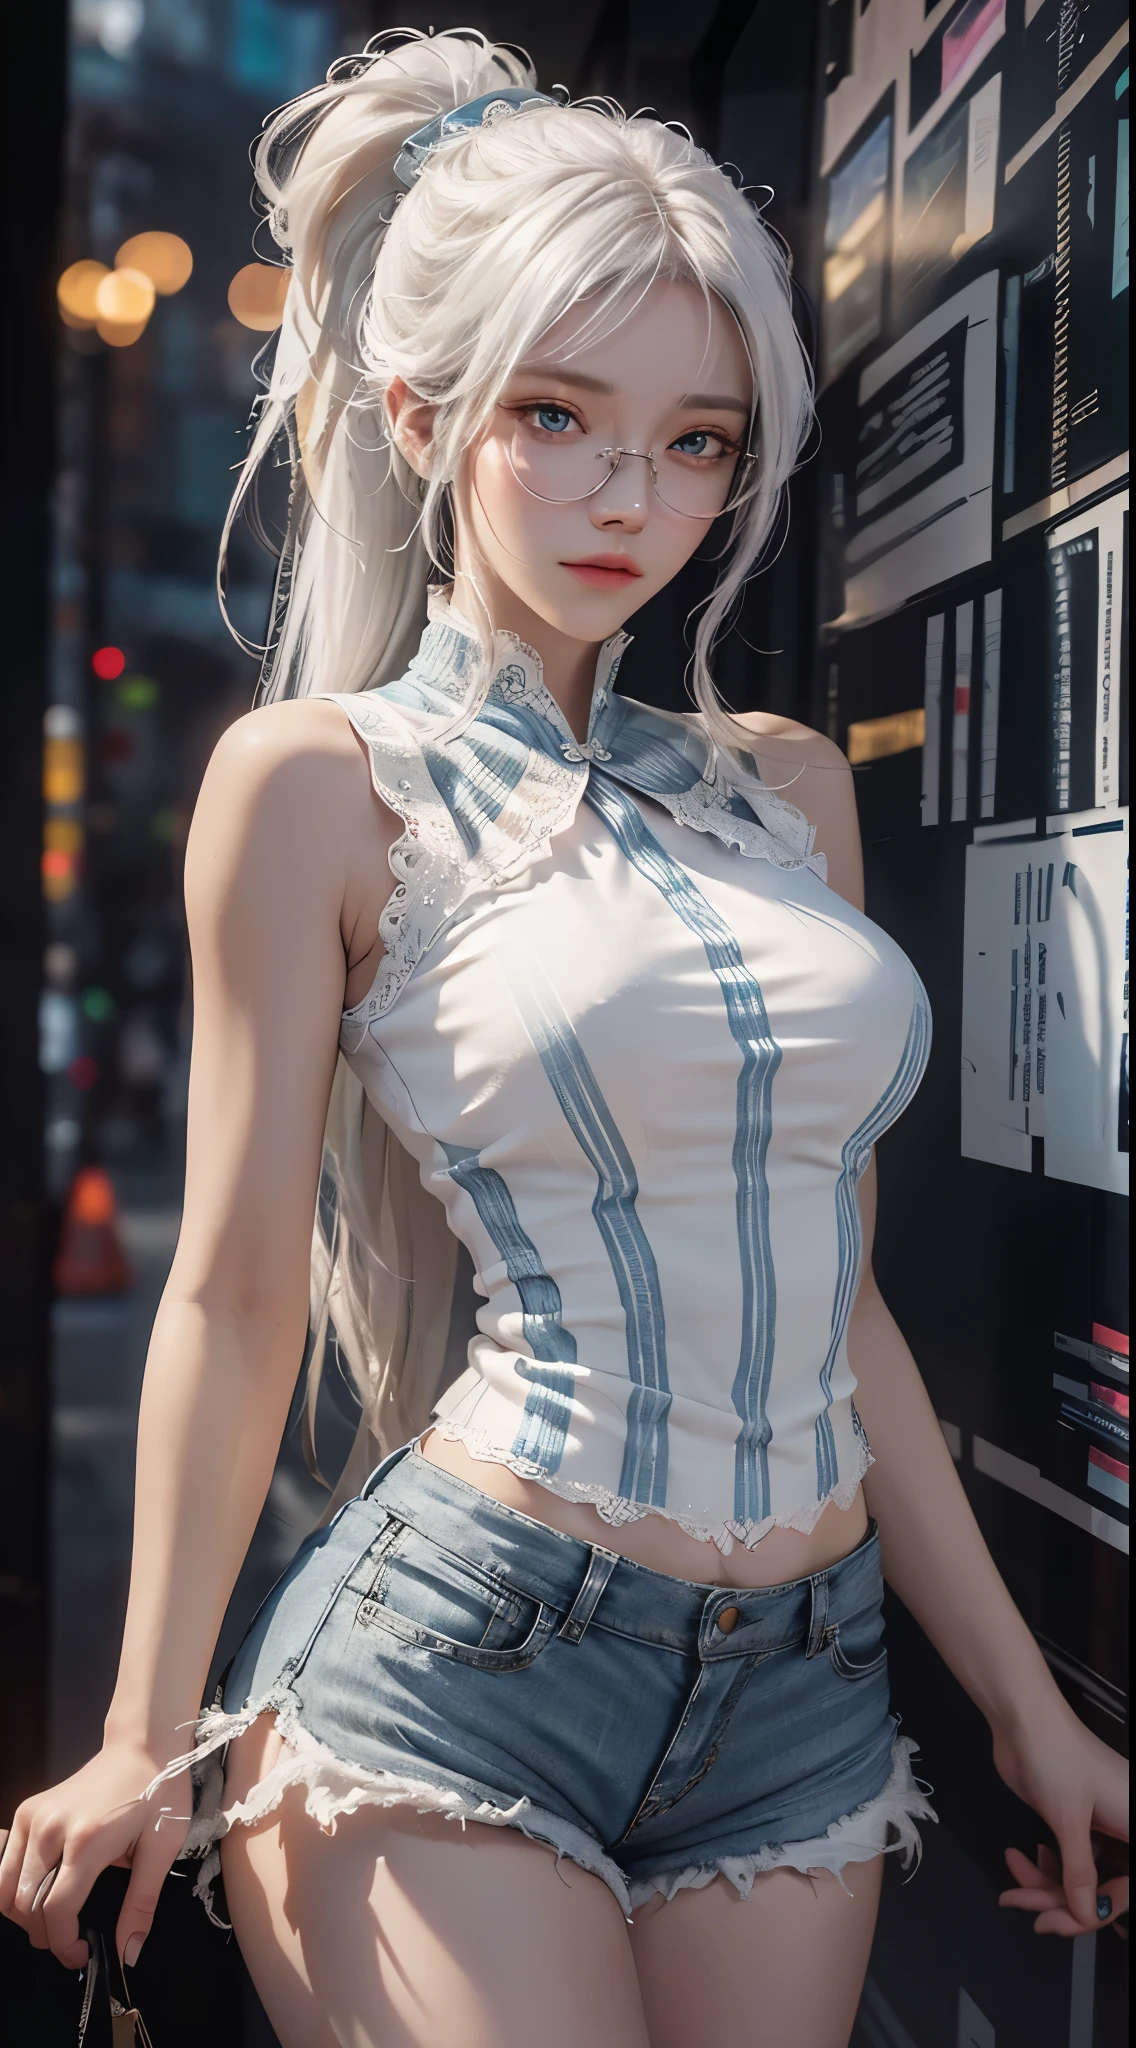 a white hair、Close-up of woman with dragon horns, beautiful figure painting, guweiz, Gurwitz style artwork, White-haired God, author：Yang Jie, Epic and beautiful character art, Stunning character art, author：Fan Qi, by Wuzhun Shifan, guweiz from pixiv art station street, single ponytail, Insult, high ponytail, tall figure, long legs, (sleeveless lace shirt), (shorts), (striped )), ((striped )), Walk, elegant, dignified, feminine, graceful curves, sweet smile, Strong sense of detail and layering, Colorful and gorgeous, Has a unique texture, rich and colorful, Color harmony, vivid, design art, 16k, super detailed, {{illustration}}, {extremely delicate and beautiful}, {Exquisite surface treatment}, super detailed, Exquisite glowing Eyeovie lights}}, Extreme light effects, Model: realism, CFG scale: 12, Laura: Bright texture (1.35), high quality, masterpiece, Exquisite facial features, Delicate hair depiction, Detailed depiction of eyes, masterpiece, best quality, Ray tracing, Extremely detailed CG unified 8k wallpaper, masterpiece, best quality, (1 girl), perfect female figure, (((Skinny white T-shirt))), beautiful eyes, (delicate face), short black hair, hair tied up, Light blue hairpins, Black silk frame glasses, in the classroom, (White skin), (best lighting), (Super intricate details), 4K unified, (super detailed CG), Showing white legs, , hot pants, shorts,